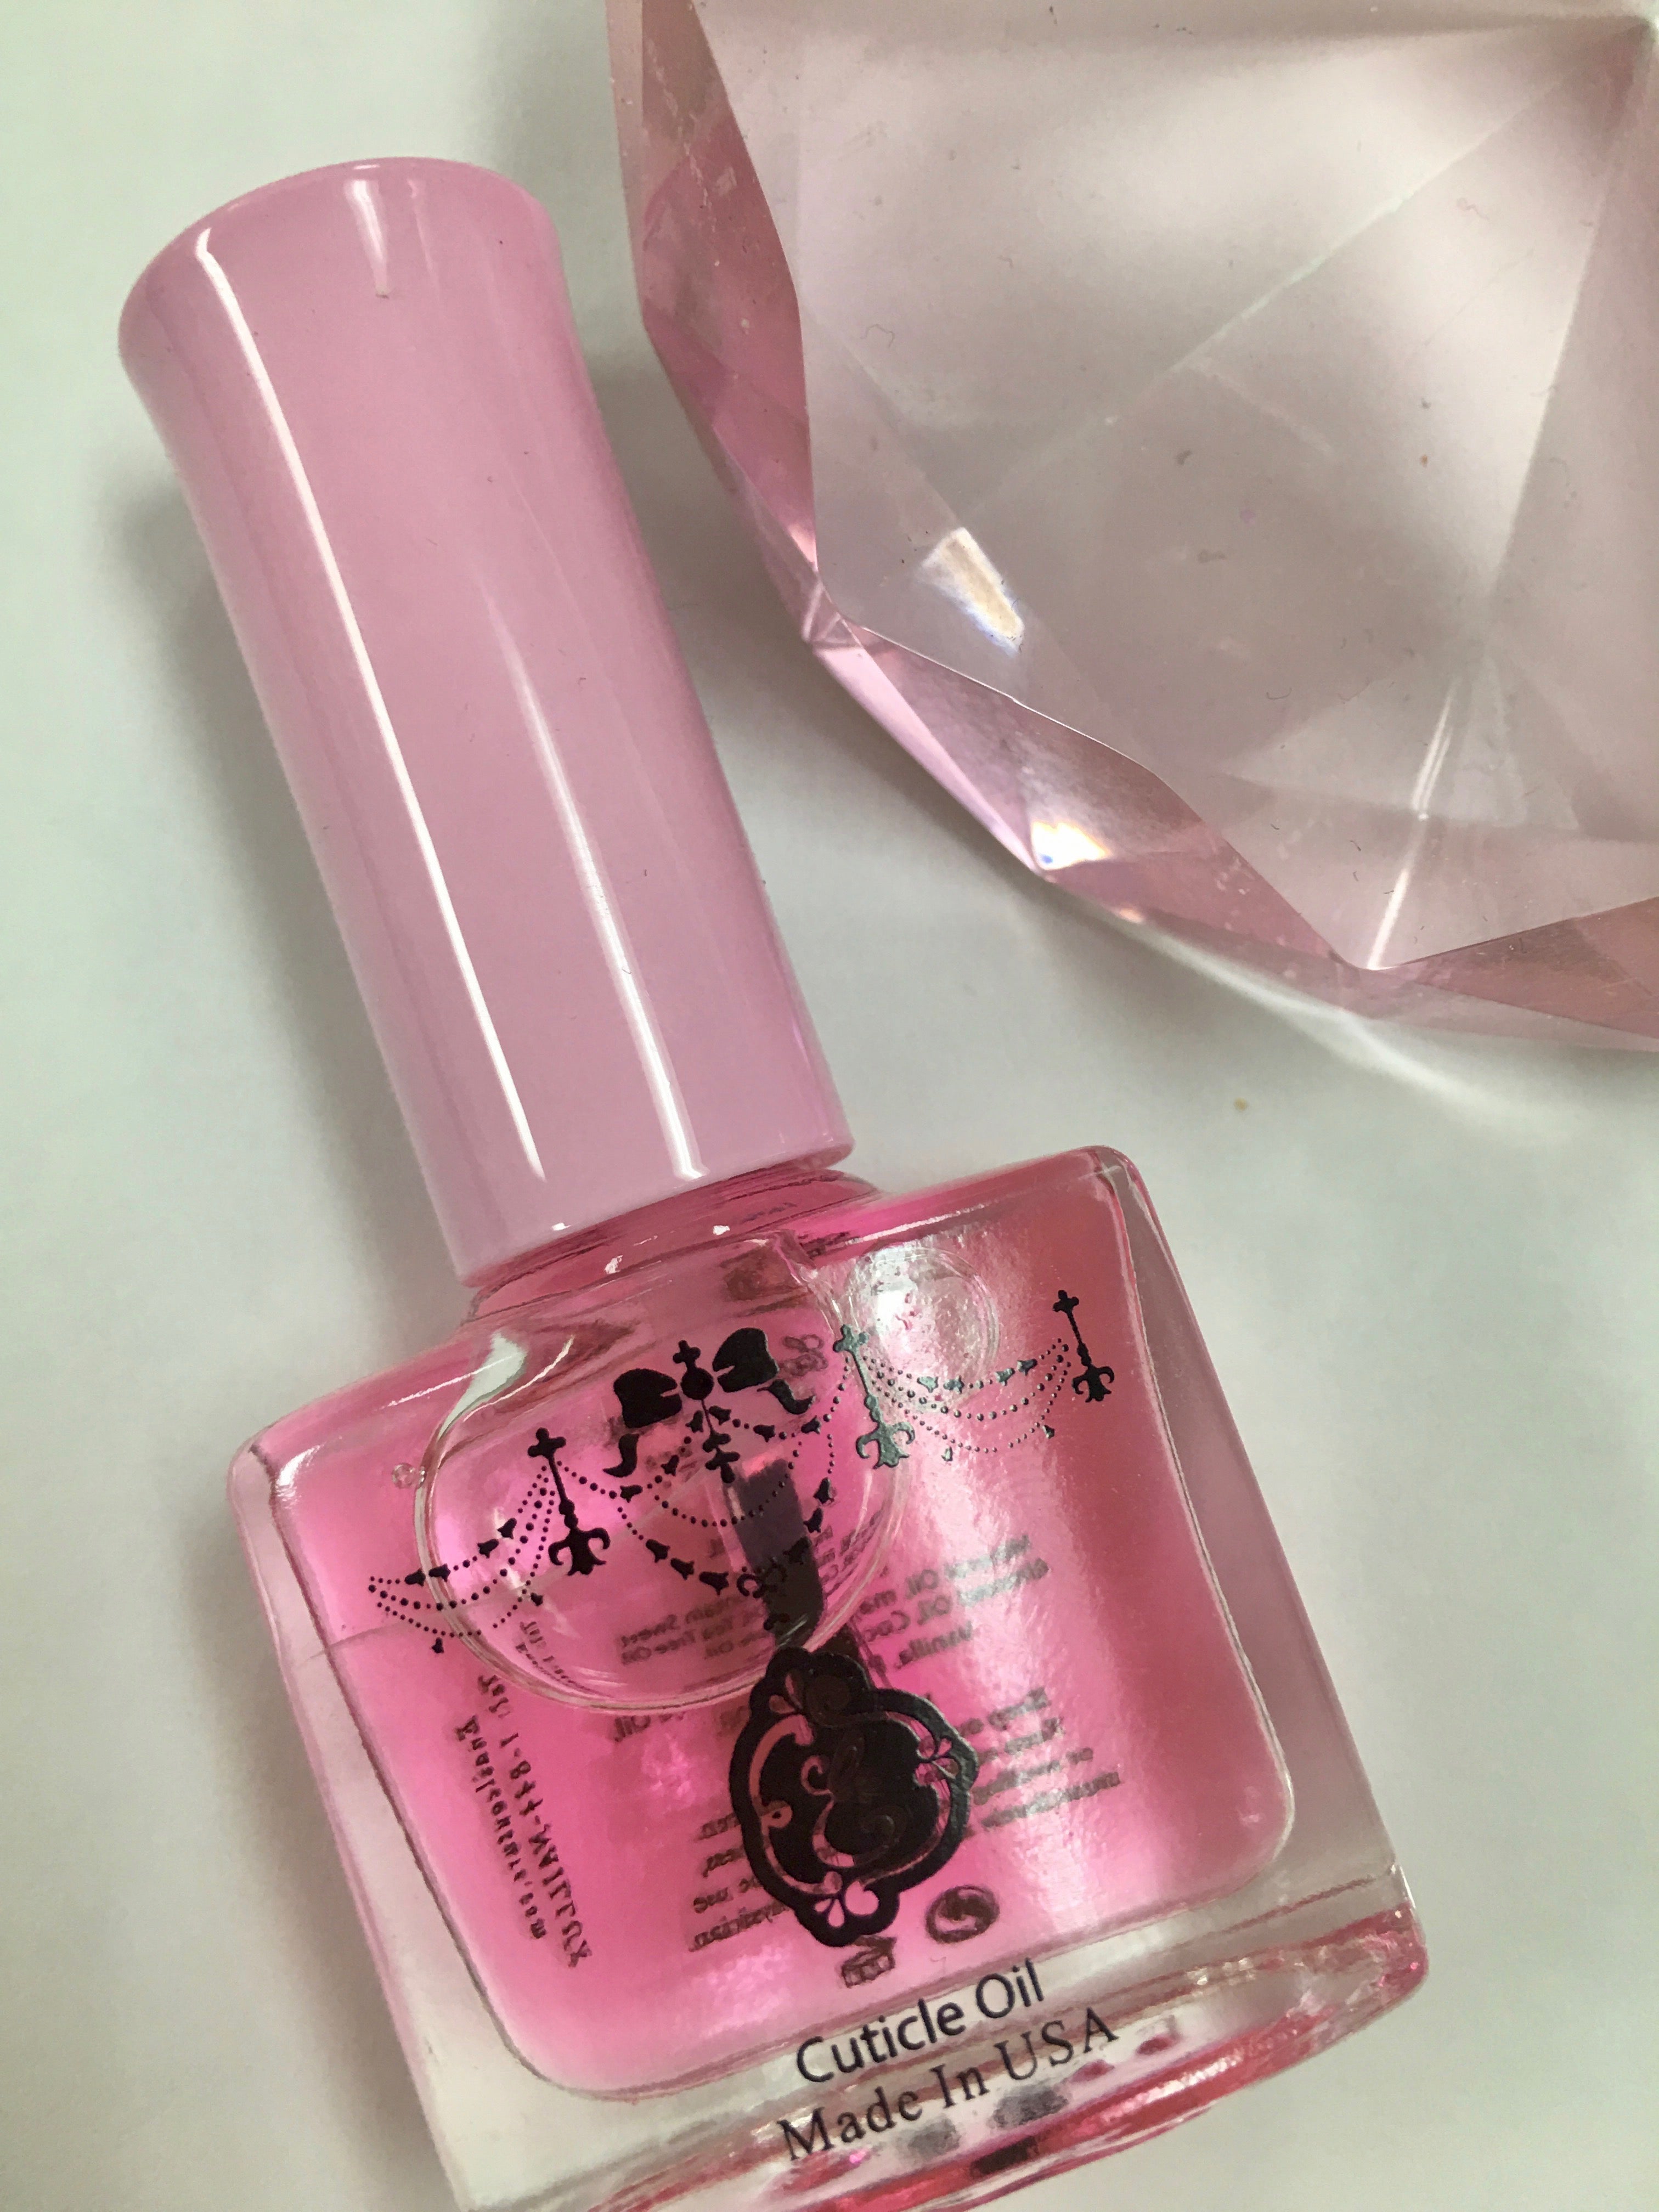 Cotton Candy Cutie Cuticle Oil ~! (Cuticle Oil Vitamin E Vitamin B Nail Strengthener Cuticle Revitalizing Oil-Nourish, Soothe & Moisturize-Nourishes and Moisturizes Dry Nails and Cuticles.)